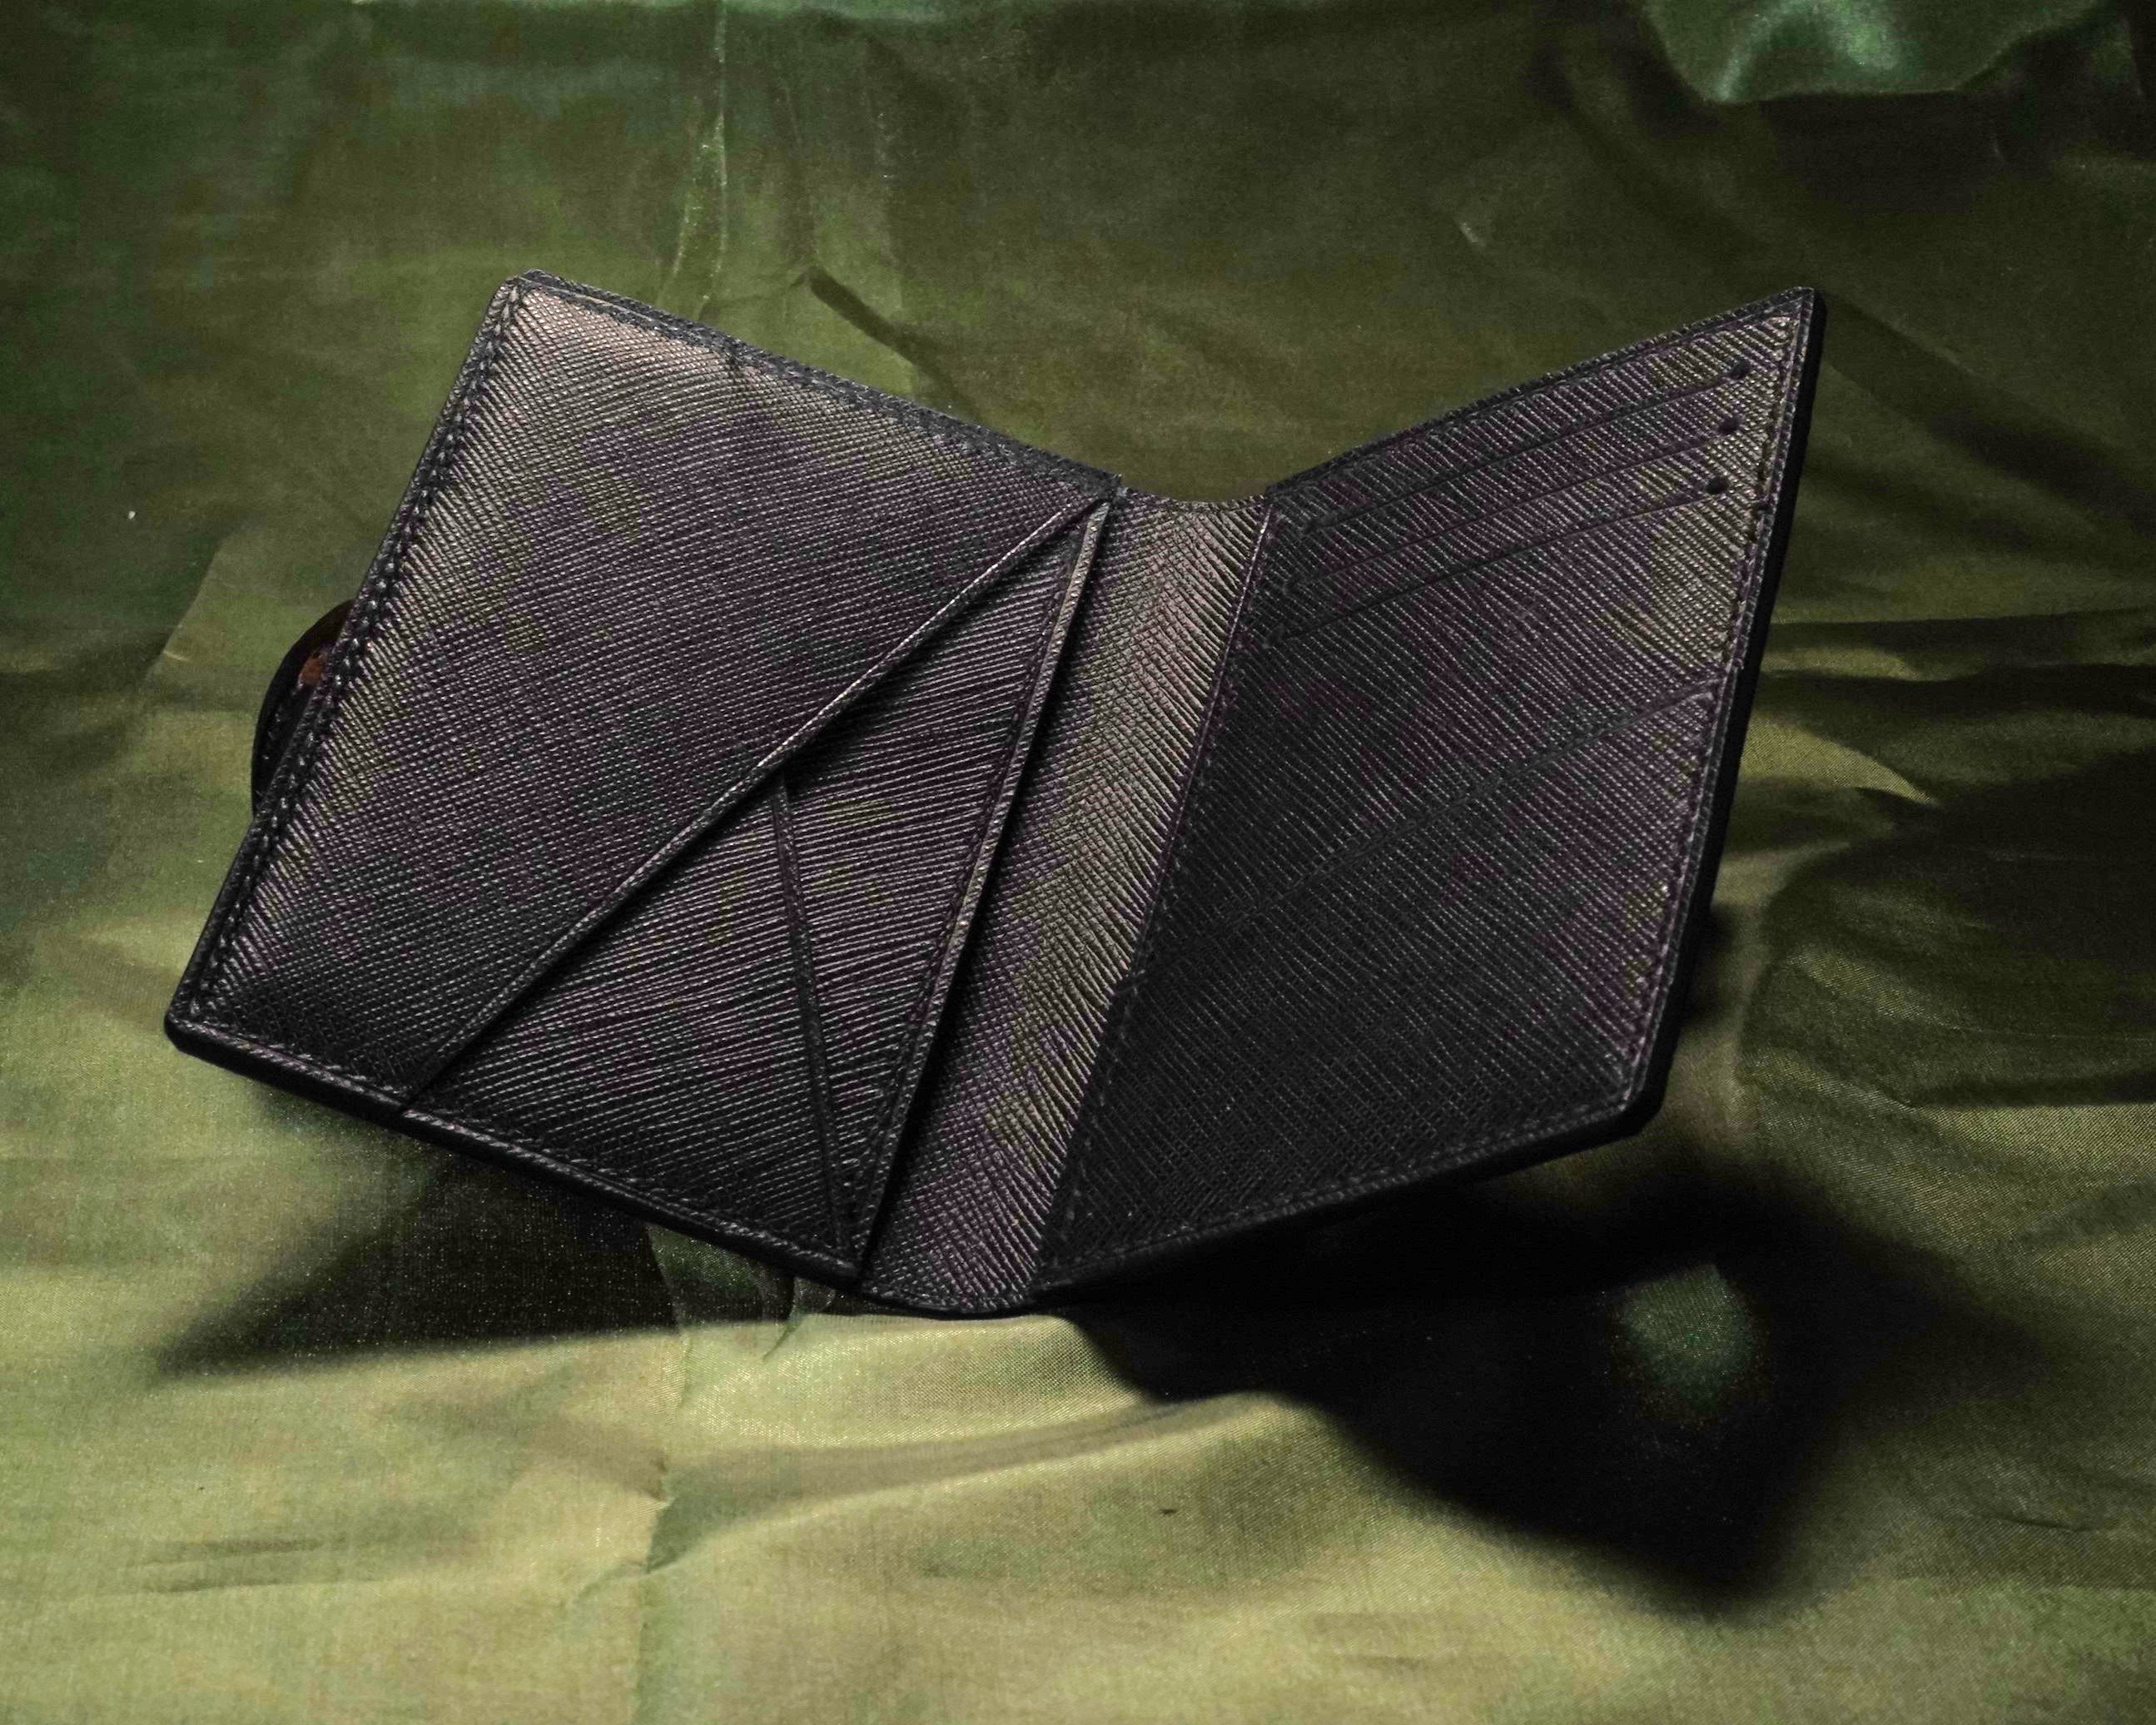 What A $600 Wallet Gets You : Louis Vuitton Taiga Leather Wallet Unboxing 